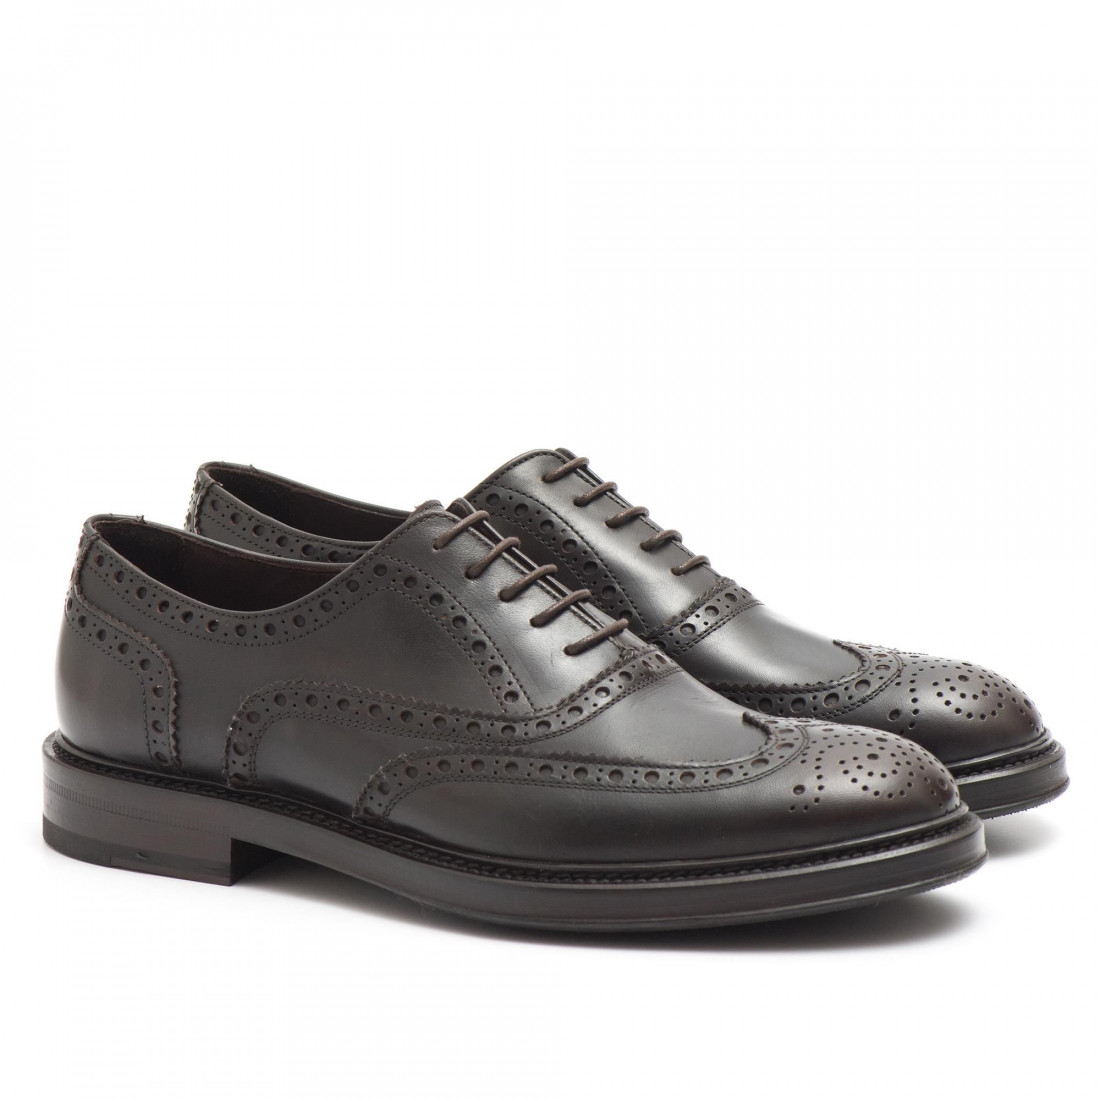 Full brogue oxford shoes in dark brown leather